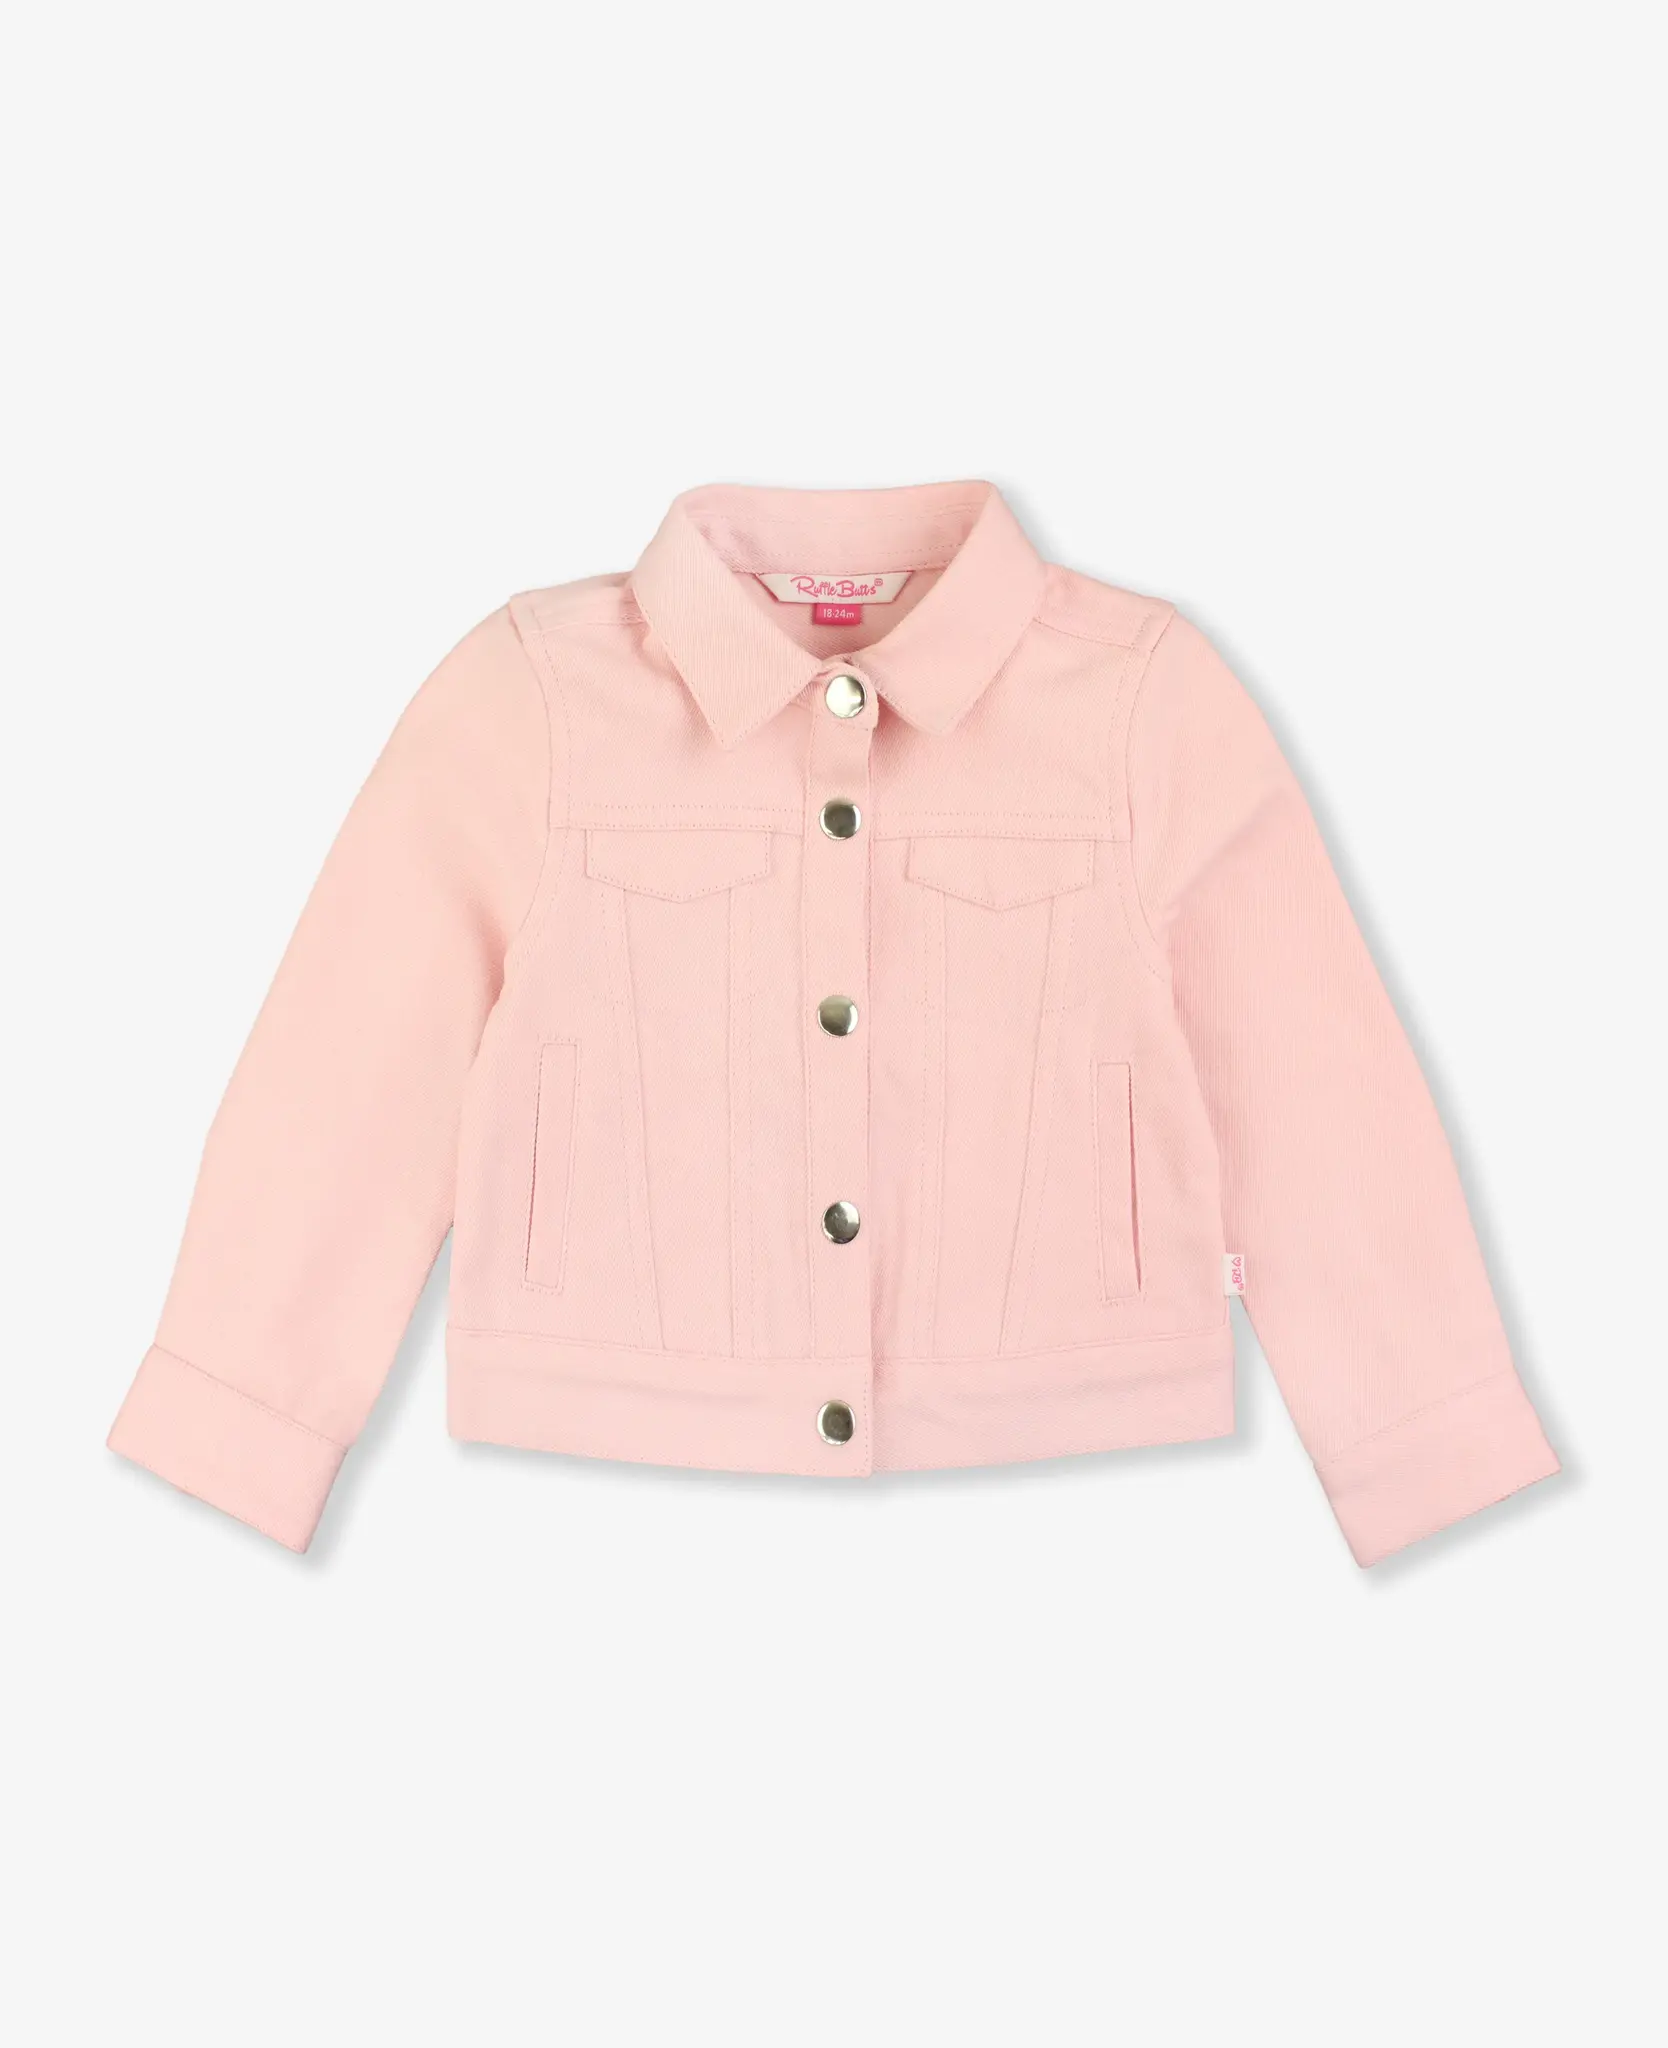 Ruffle Butts/Rugged Butts Stretch Denim Jacket Pink